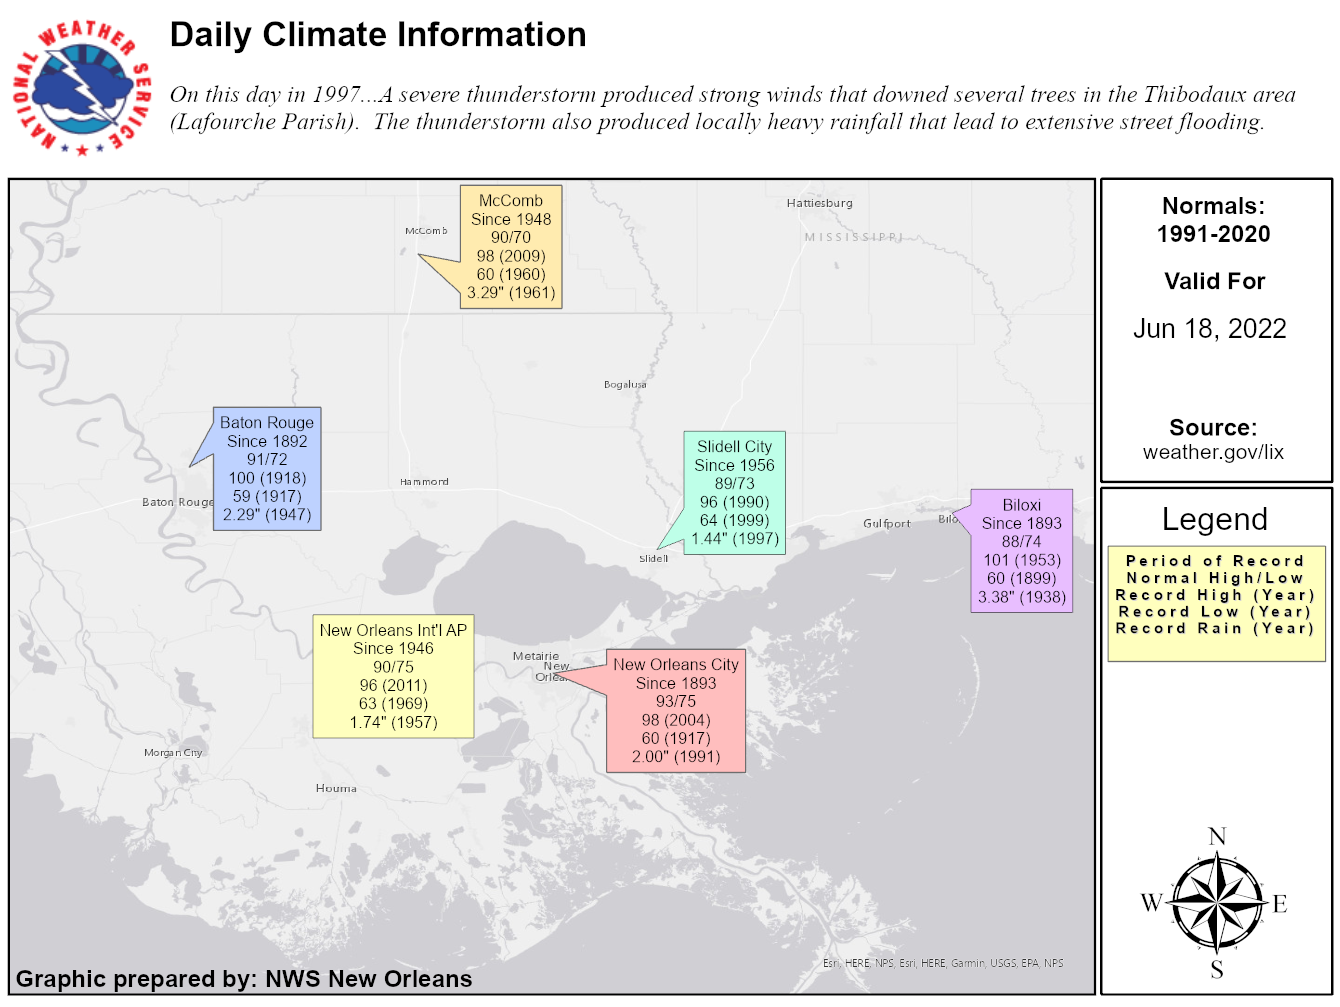 Image of Climate Data for Today